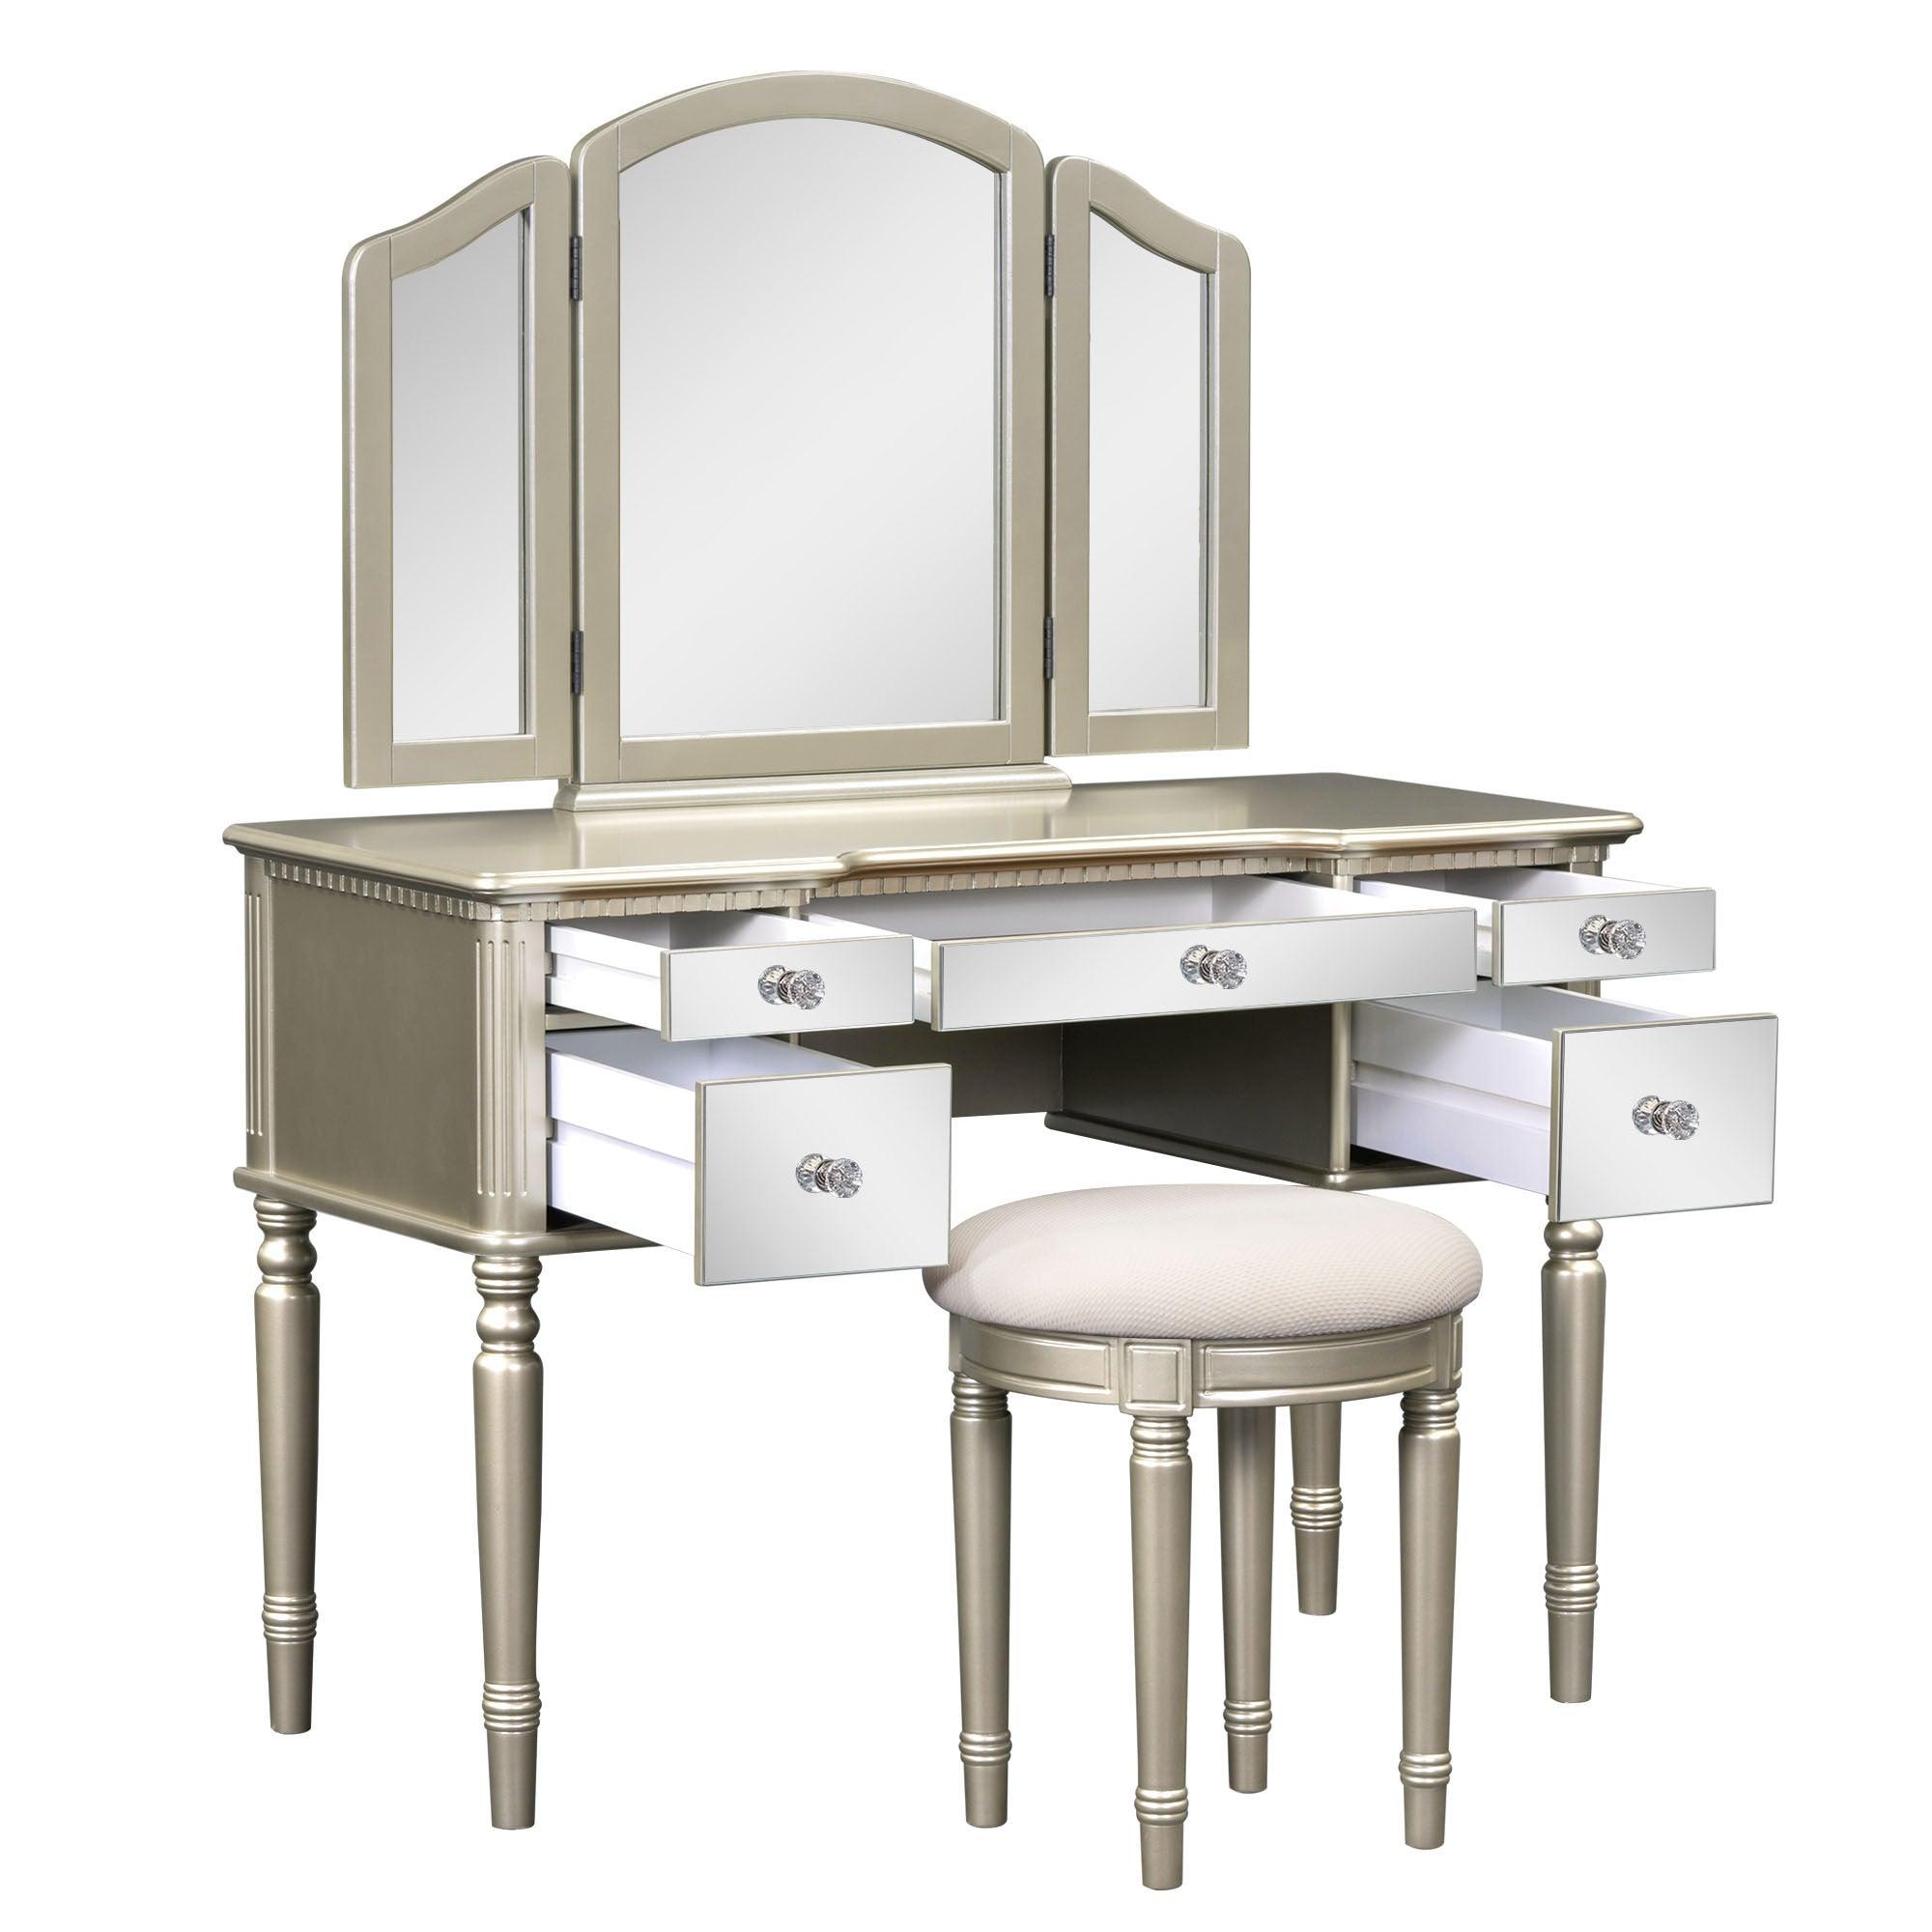 43" Dressing Table Set with Mirrored Drawers and Stool, Tri-fold Mirror, Makeup Vanity Set for Bedroom, Gold